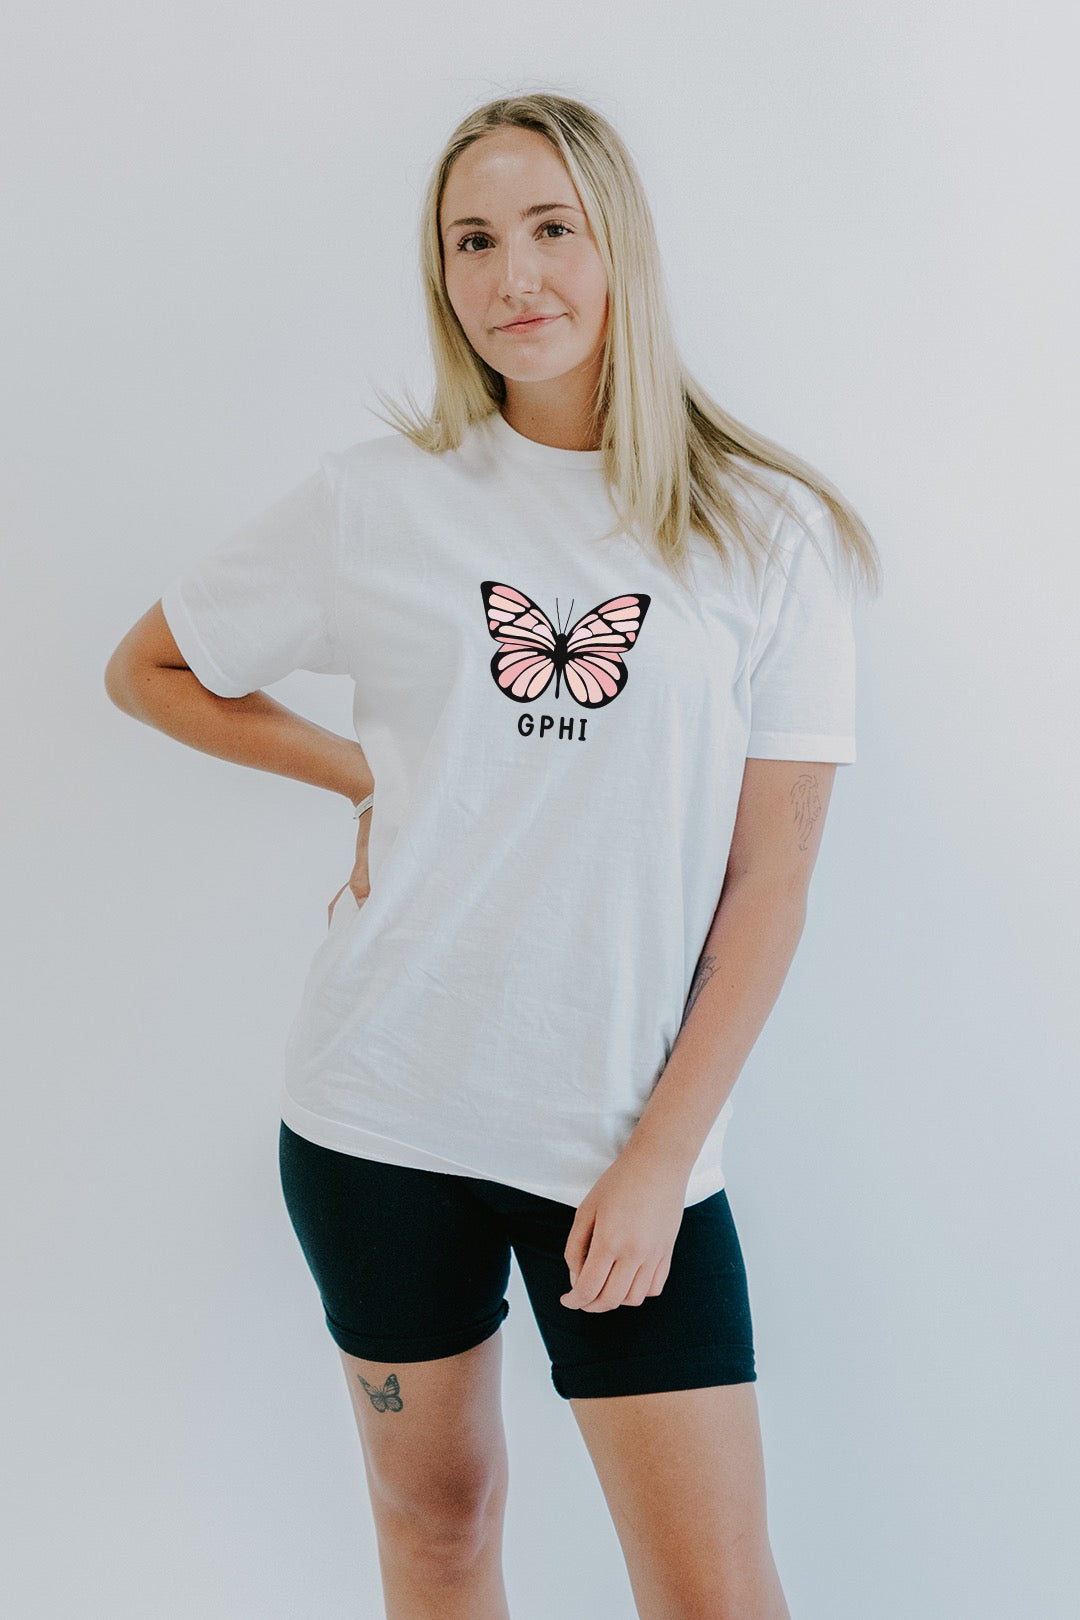 Butterfly tee - available for most sororities! - Spikes and Seams Greek